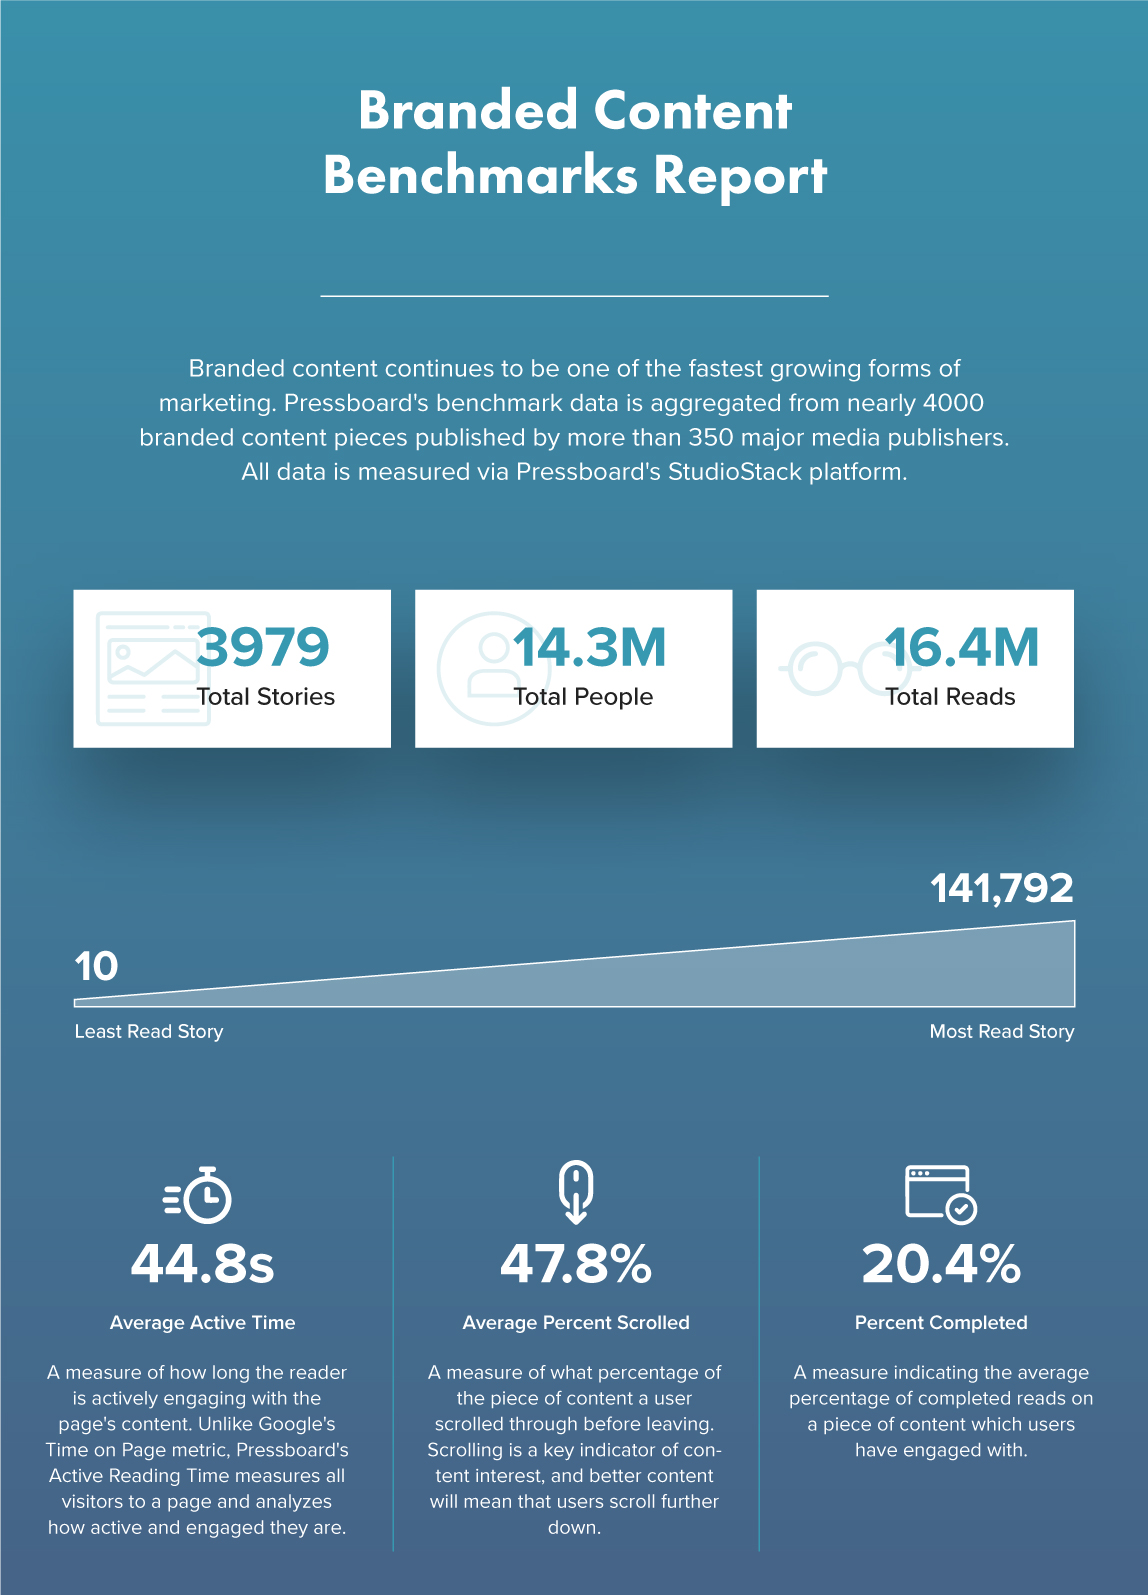 Branded Content benchmarks